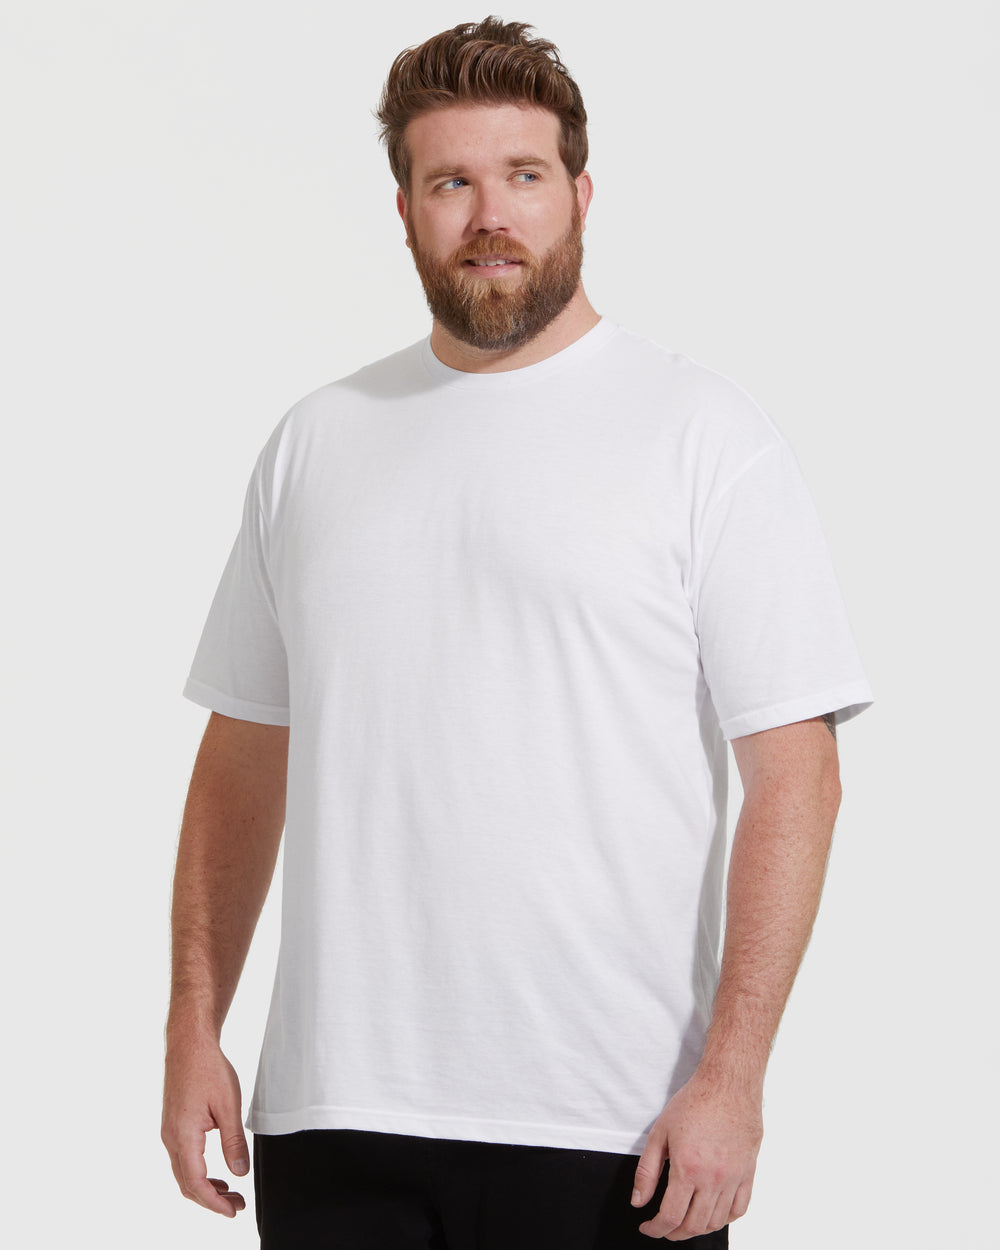 True Classic Tees Men's Fitted Crew Neck, 6 Pack, Size: 2XL, White